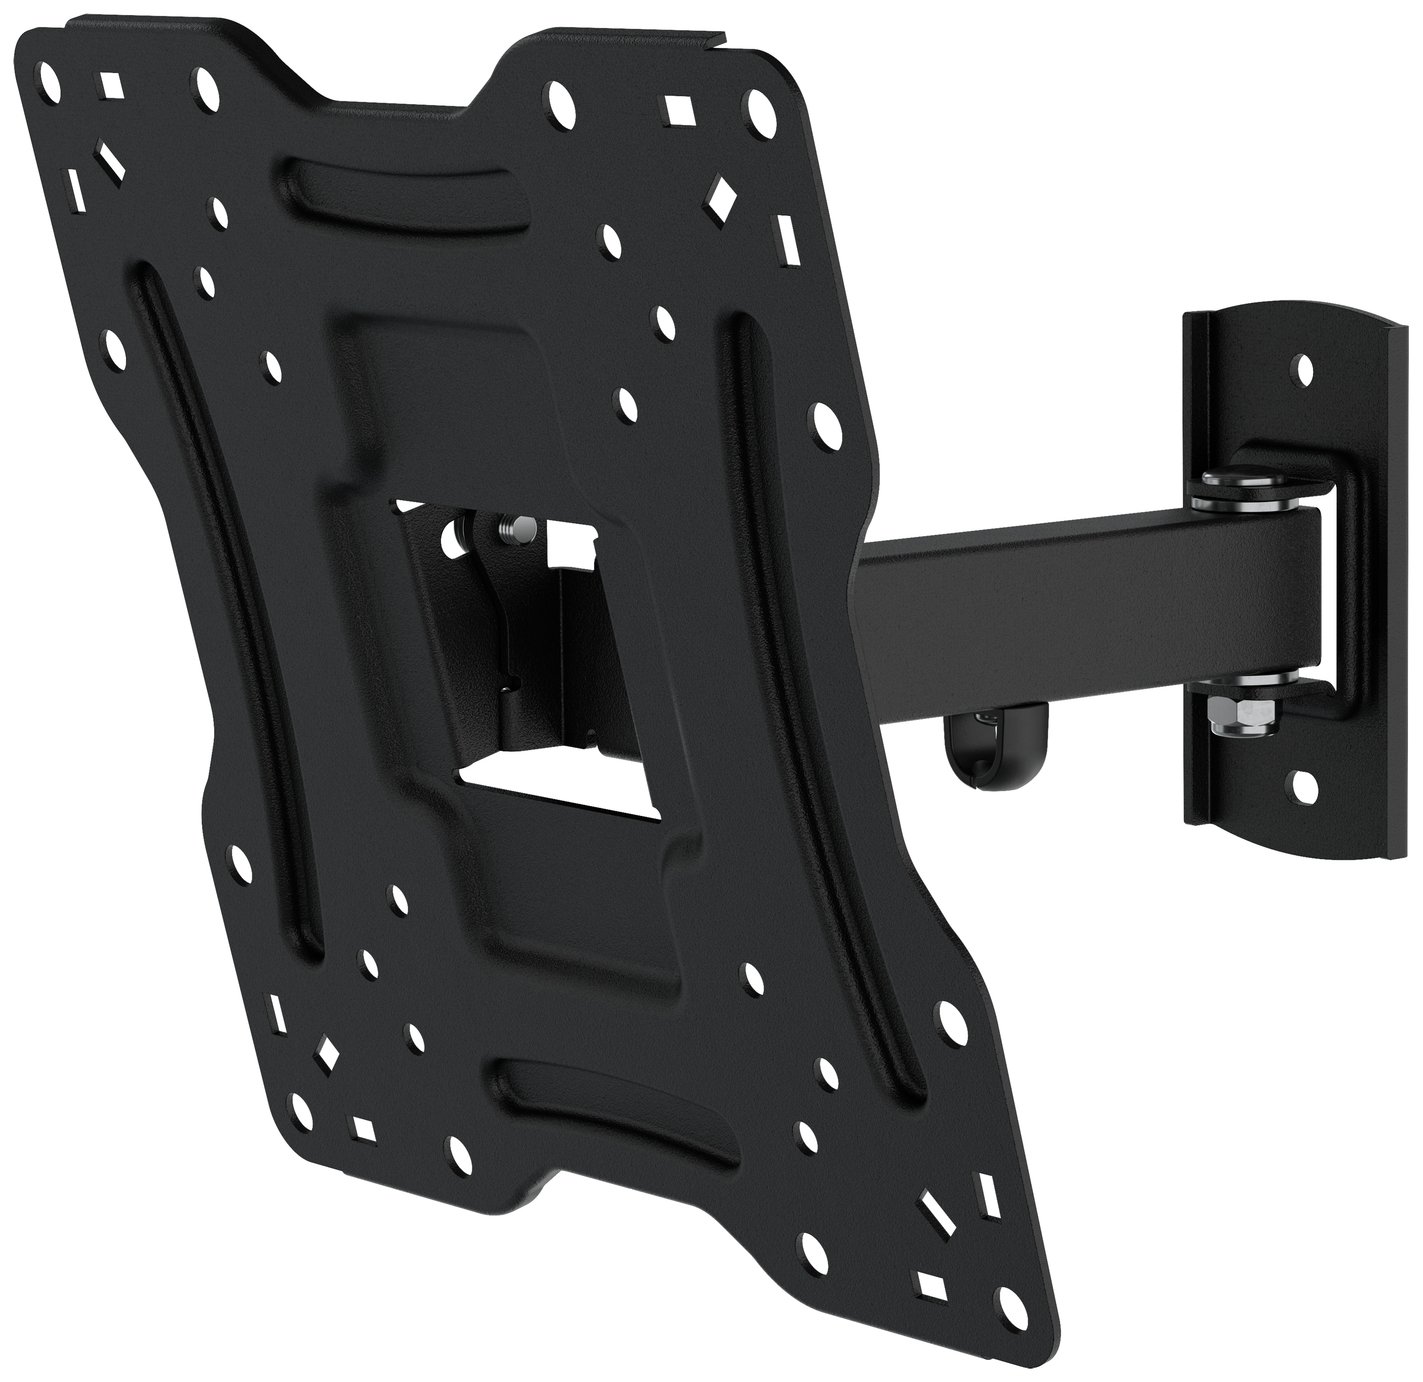 AVF Standard Multi-Position Up To 40 Inch TV Wall Bracket Review